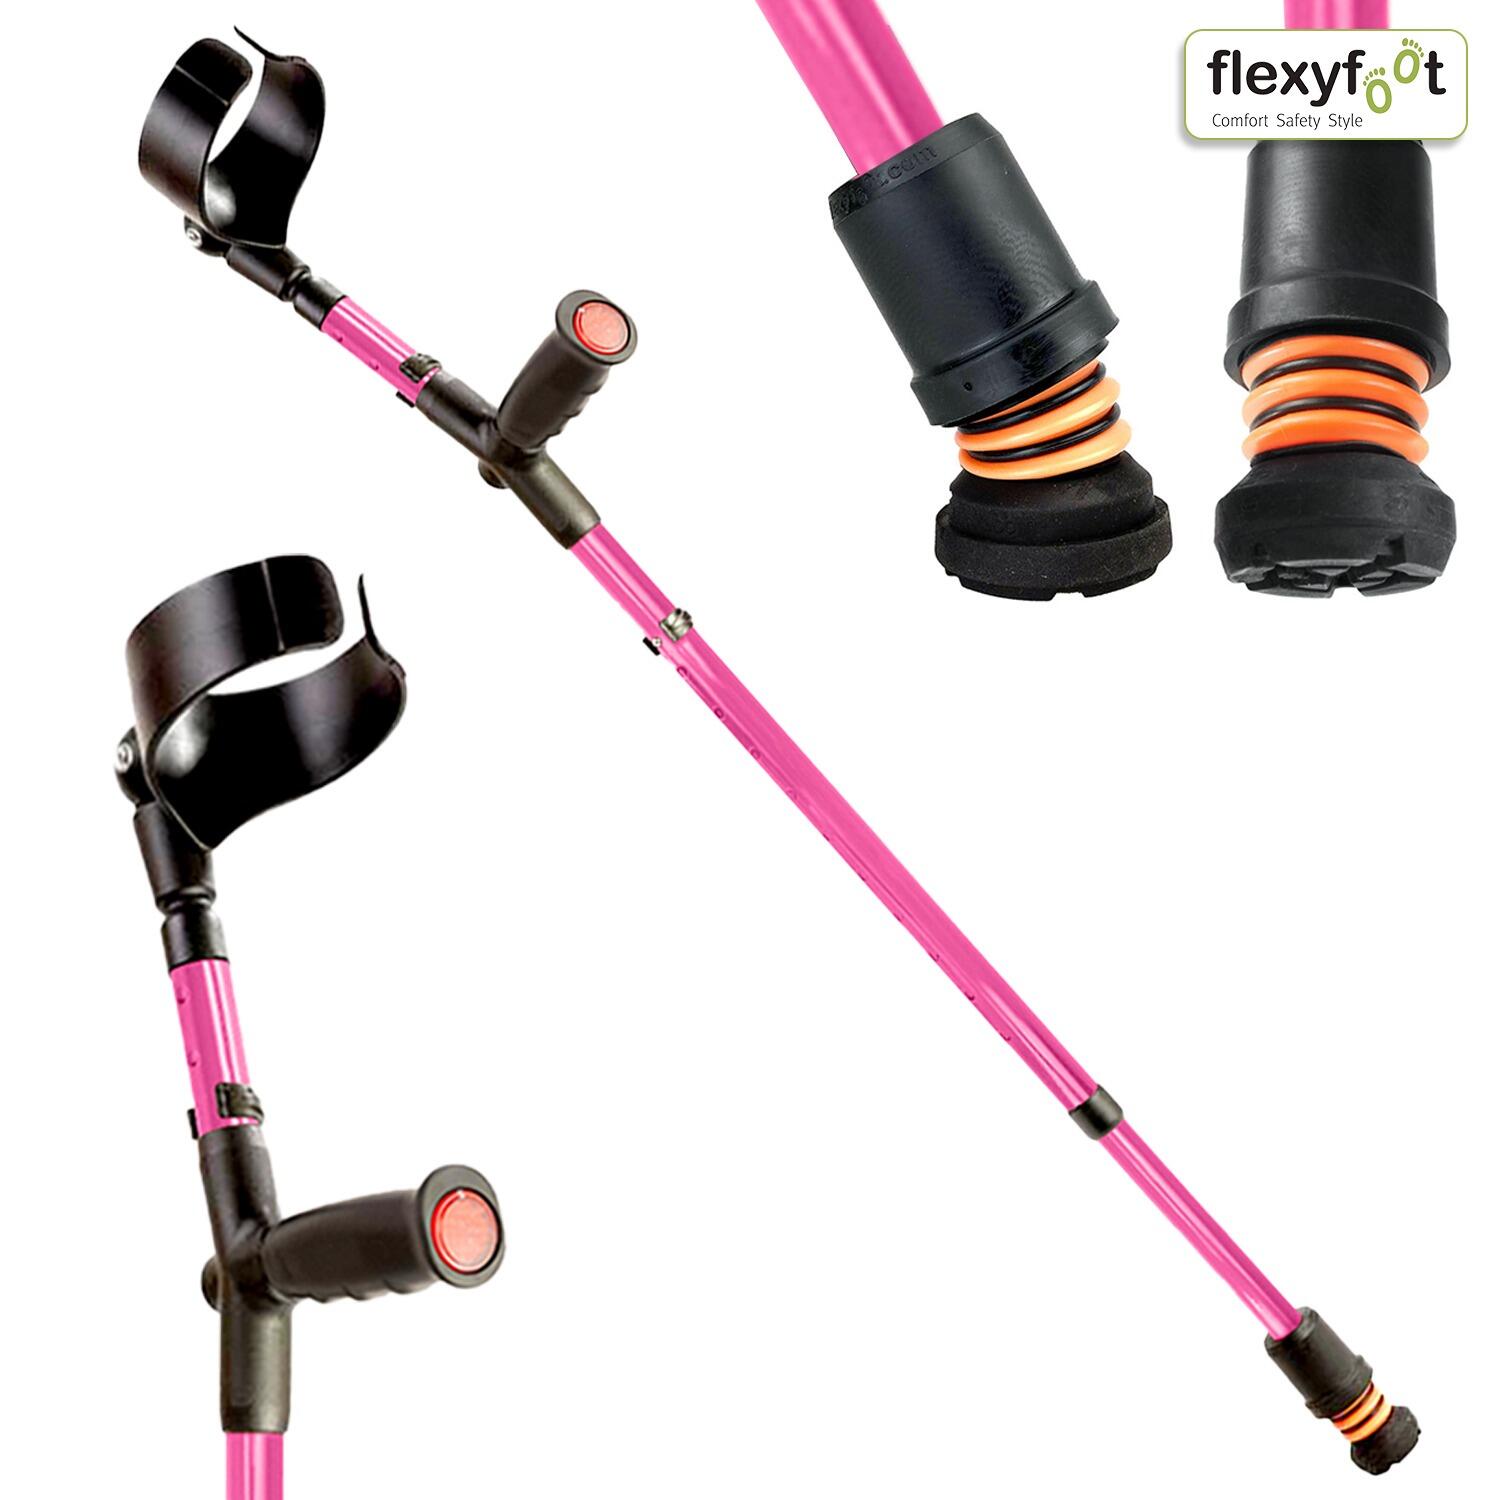 Flexyfoot Soft Grip Double Adjustable Crutches - Pink